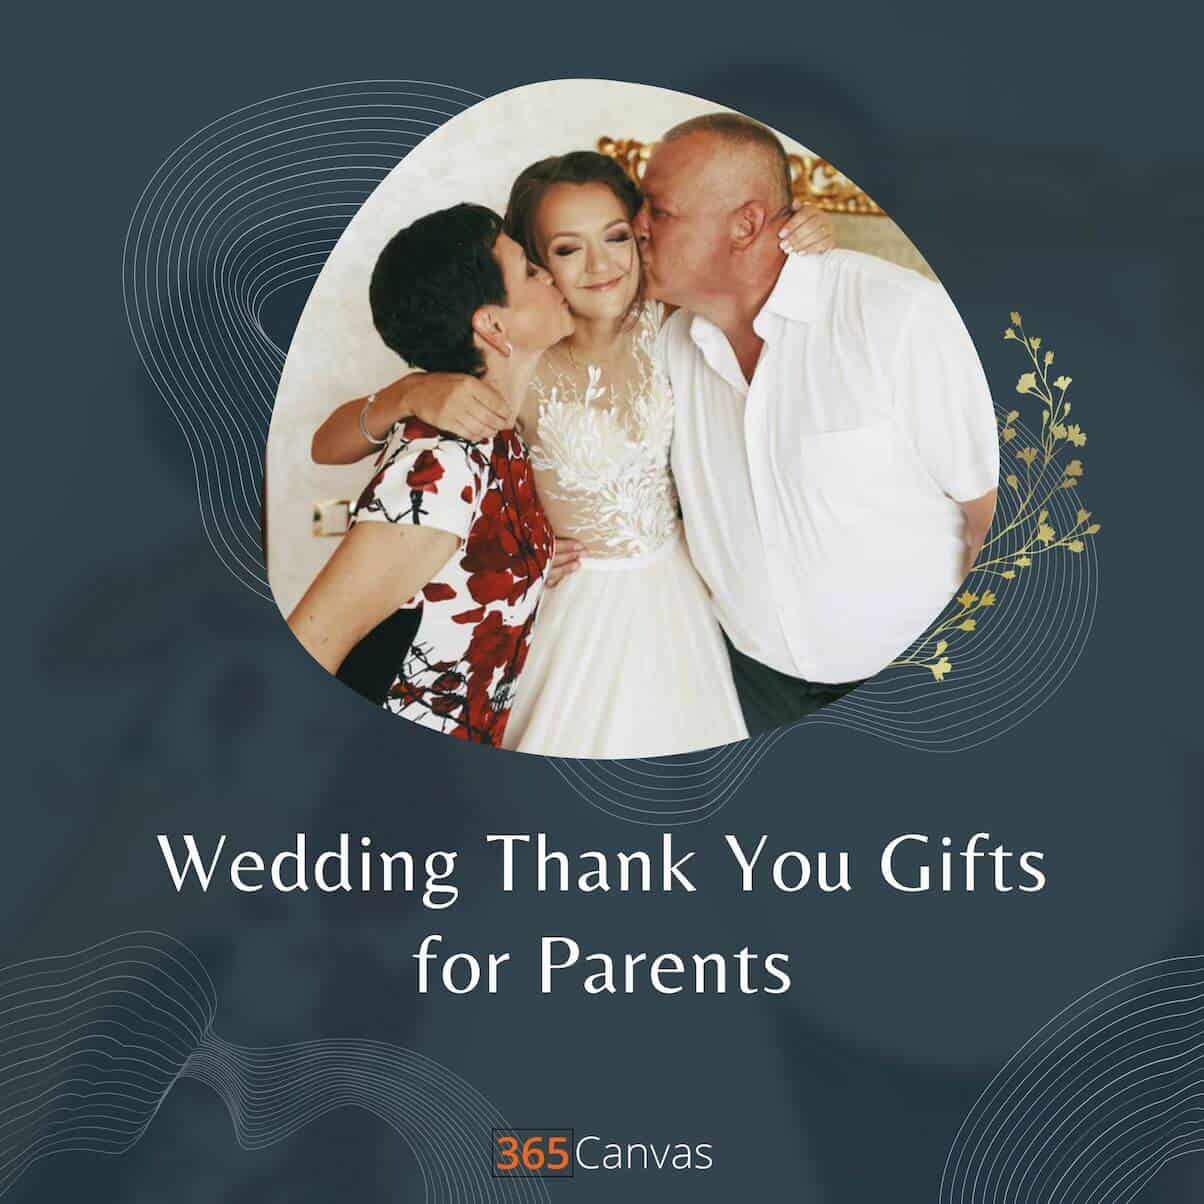 The 24 Sweetest Wedding Gifts for Parents & In-Laws to Say Thank You